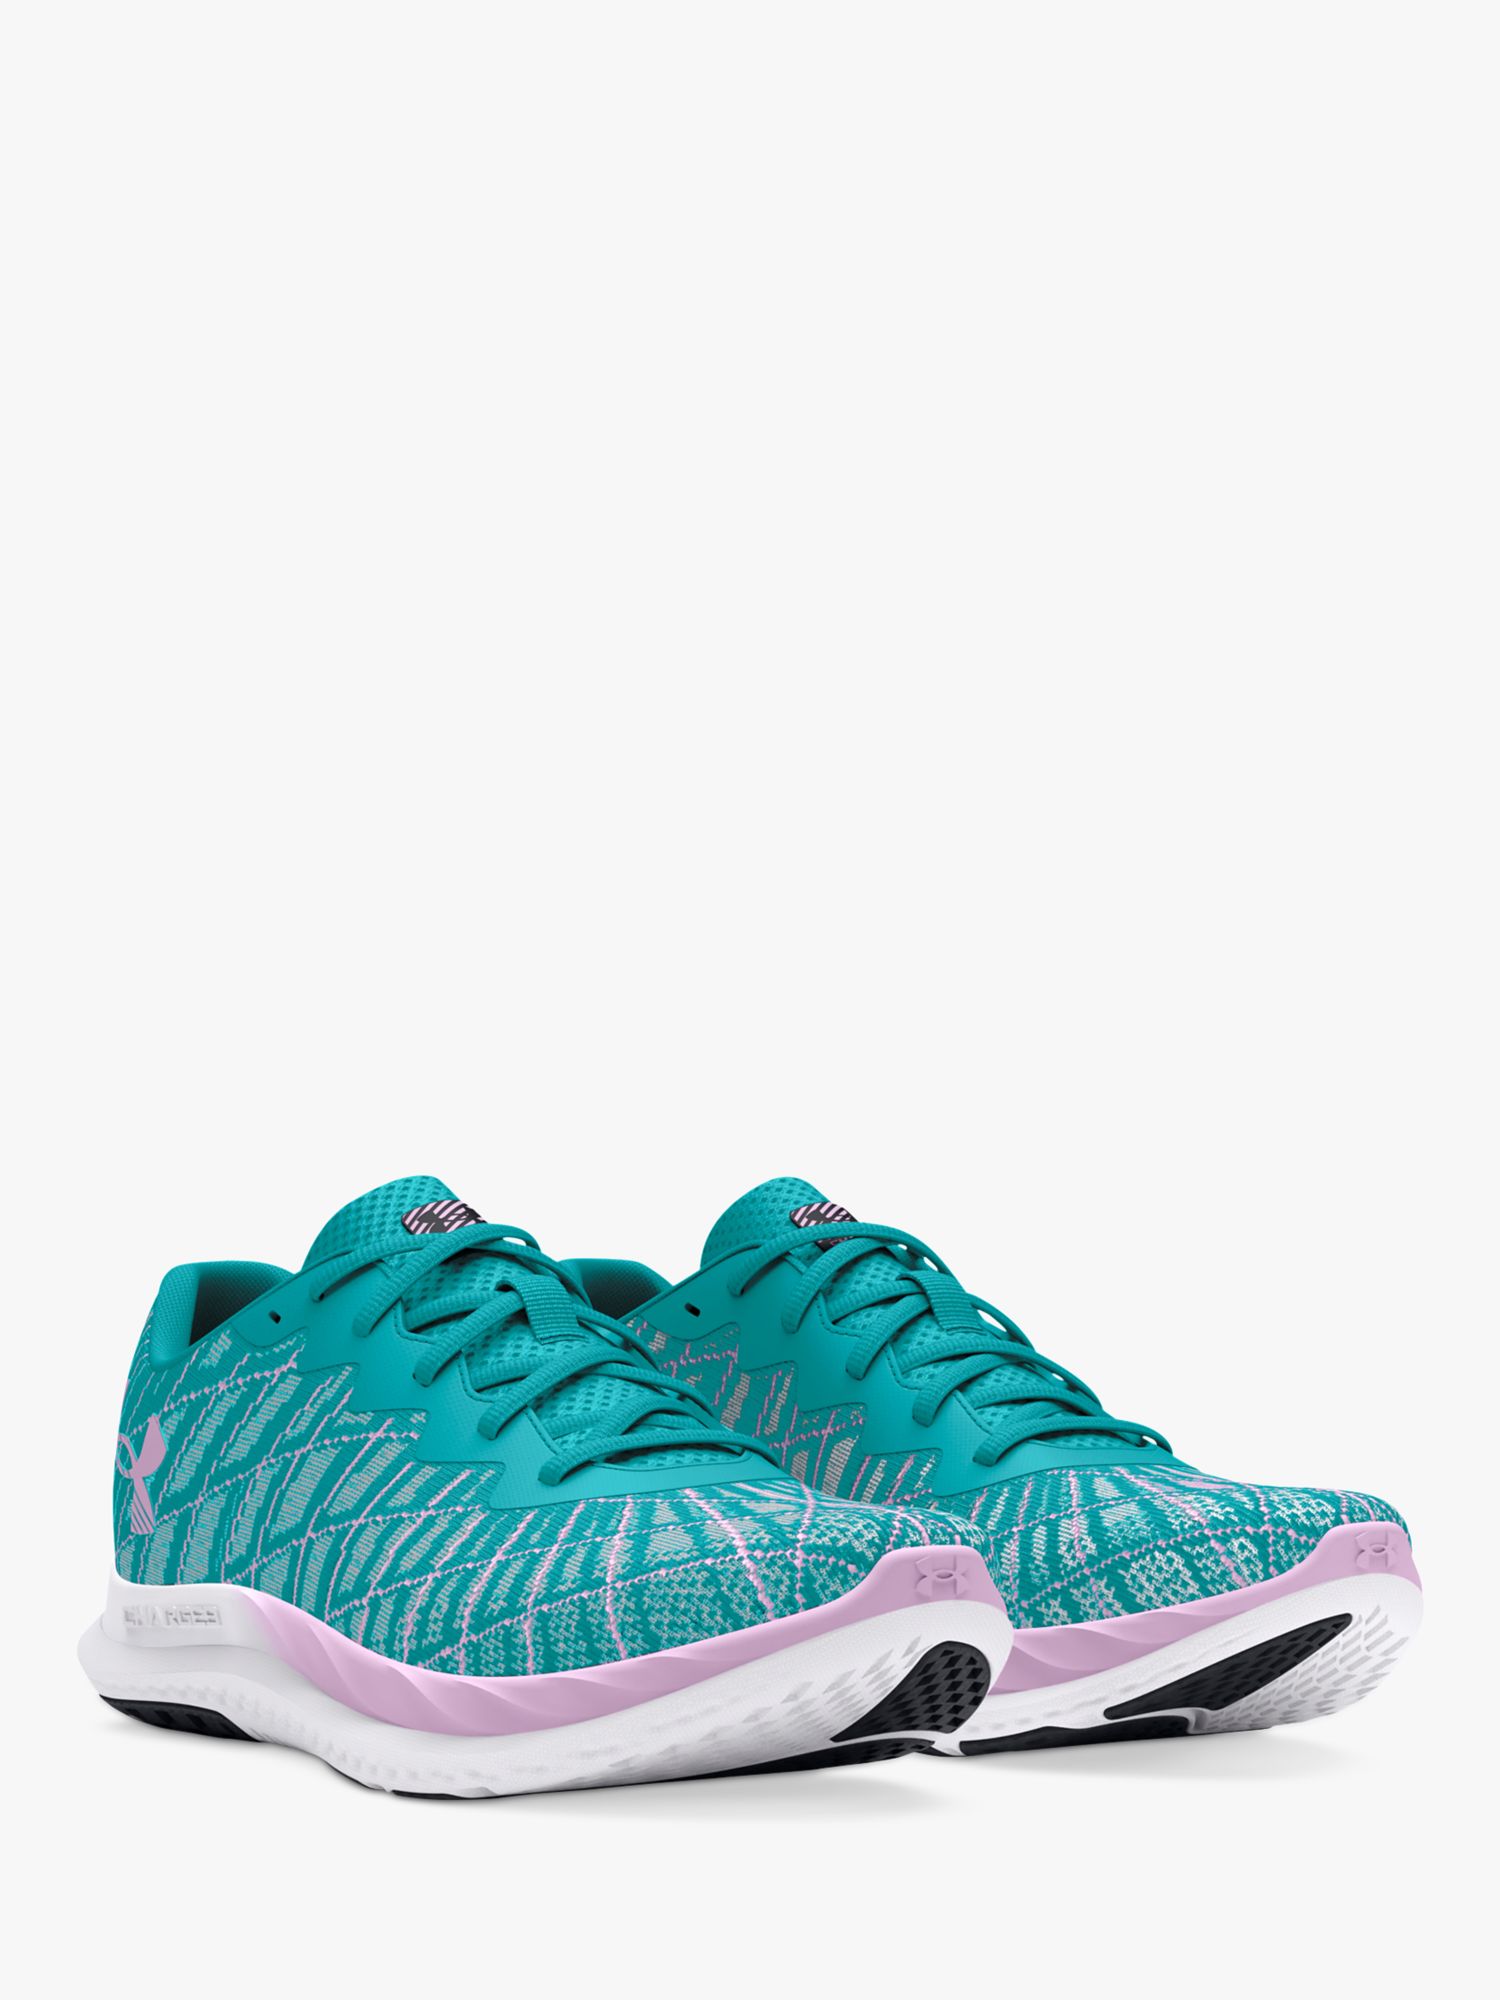 Buy Under Armour Charged Women's Running Shoes, Teal/Purple Ace Online at johnlewis.com